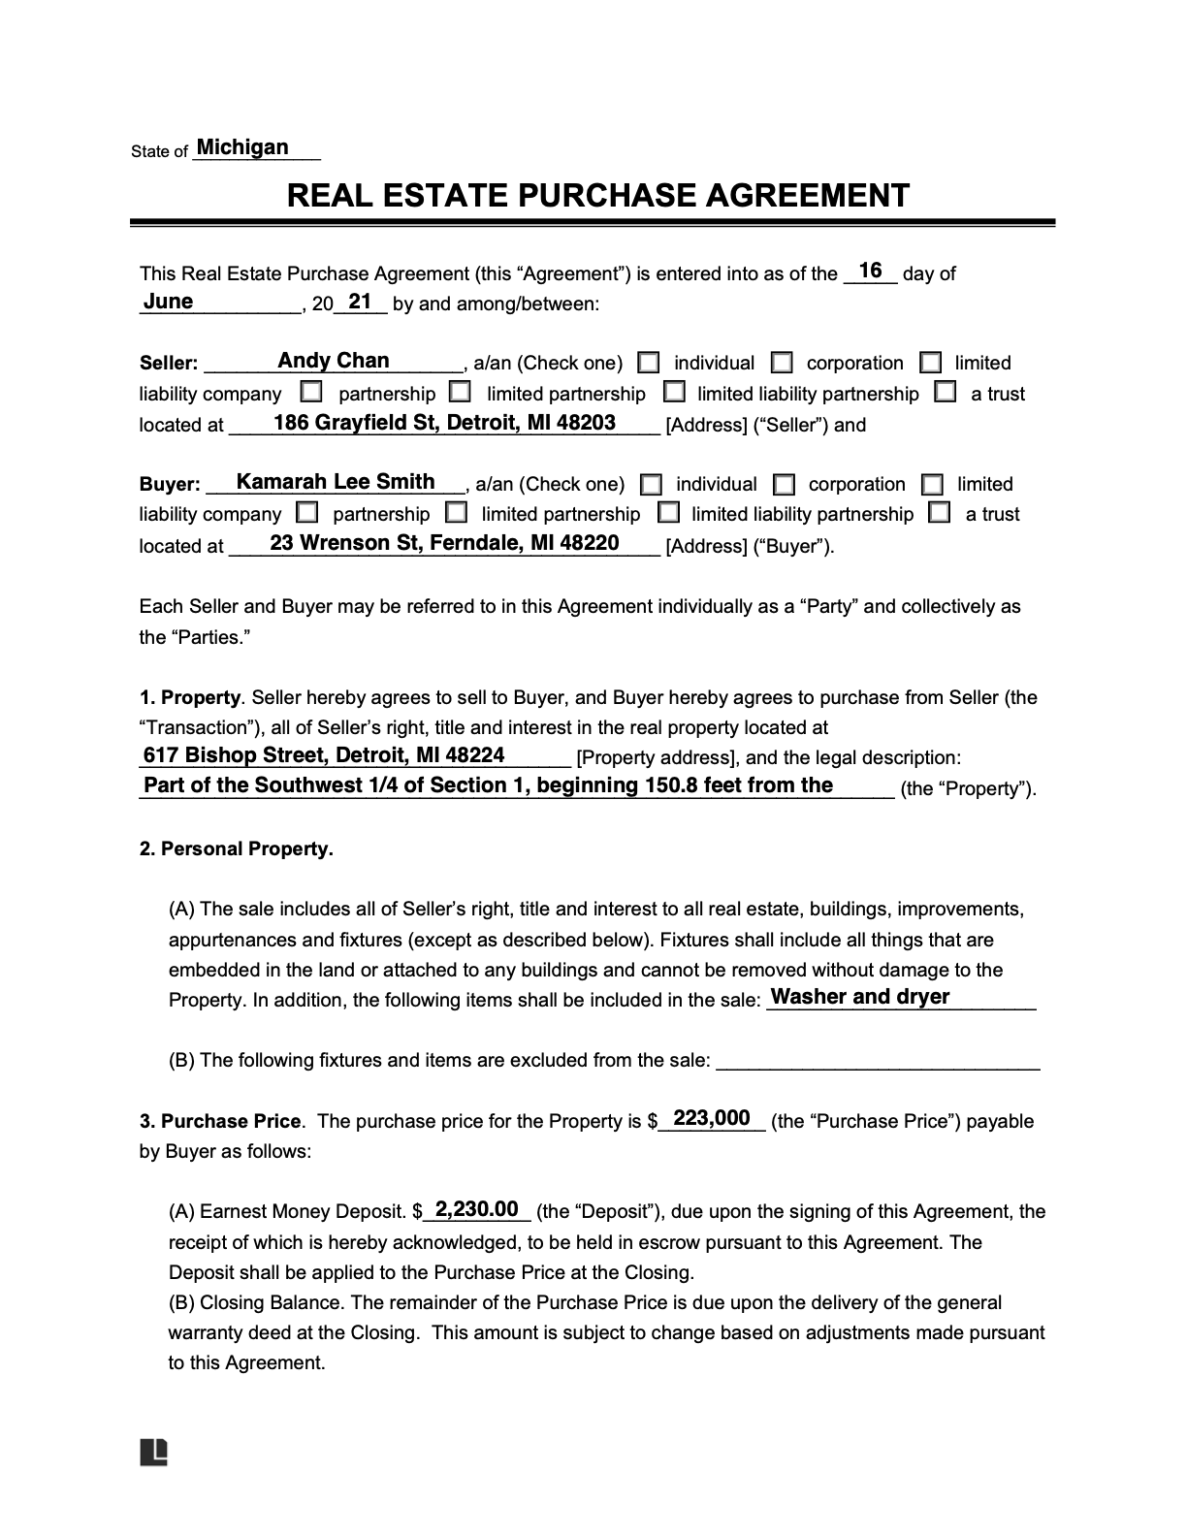 assignment of real estate purchase and sale agreement template